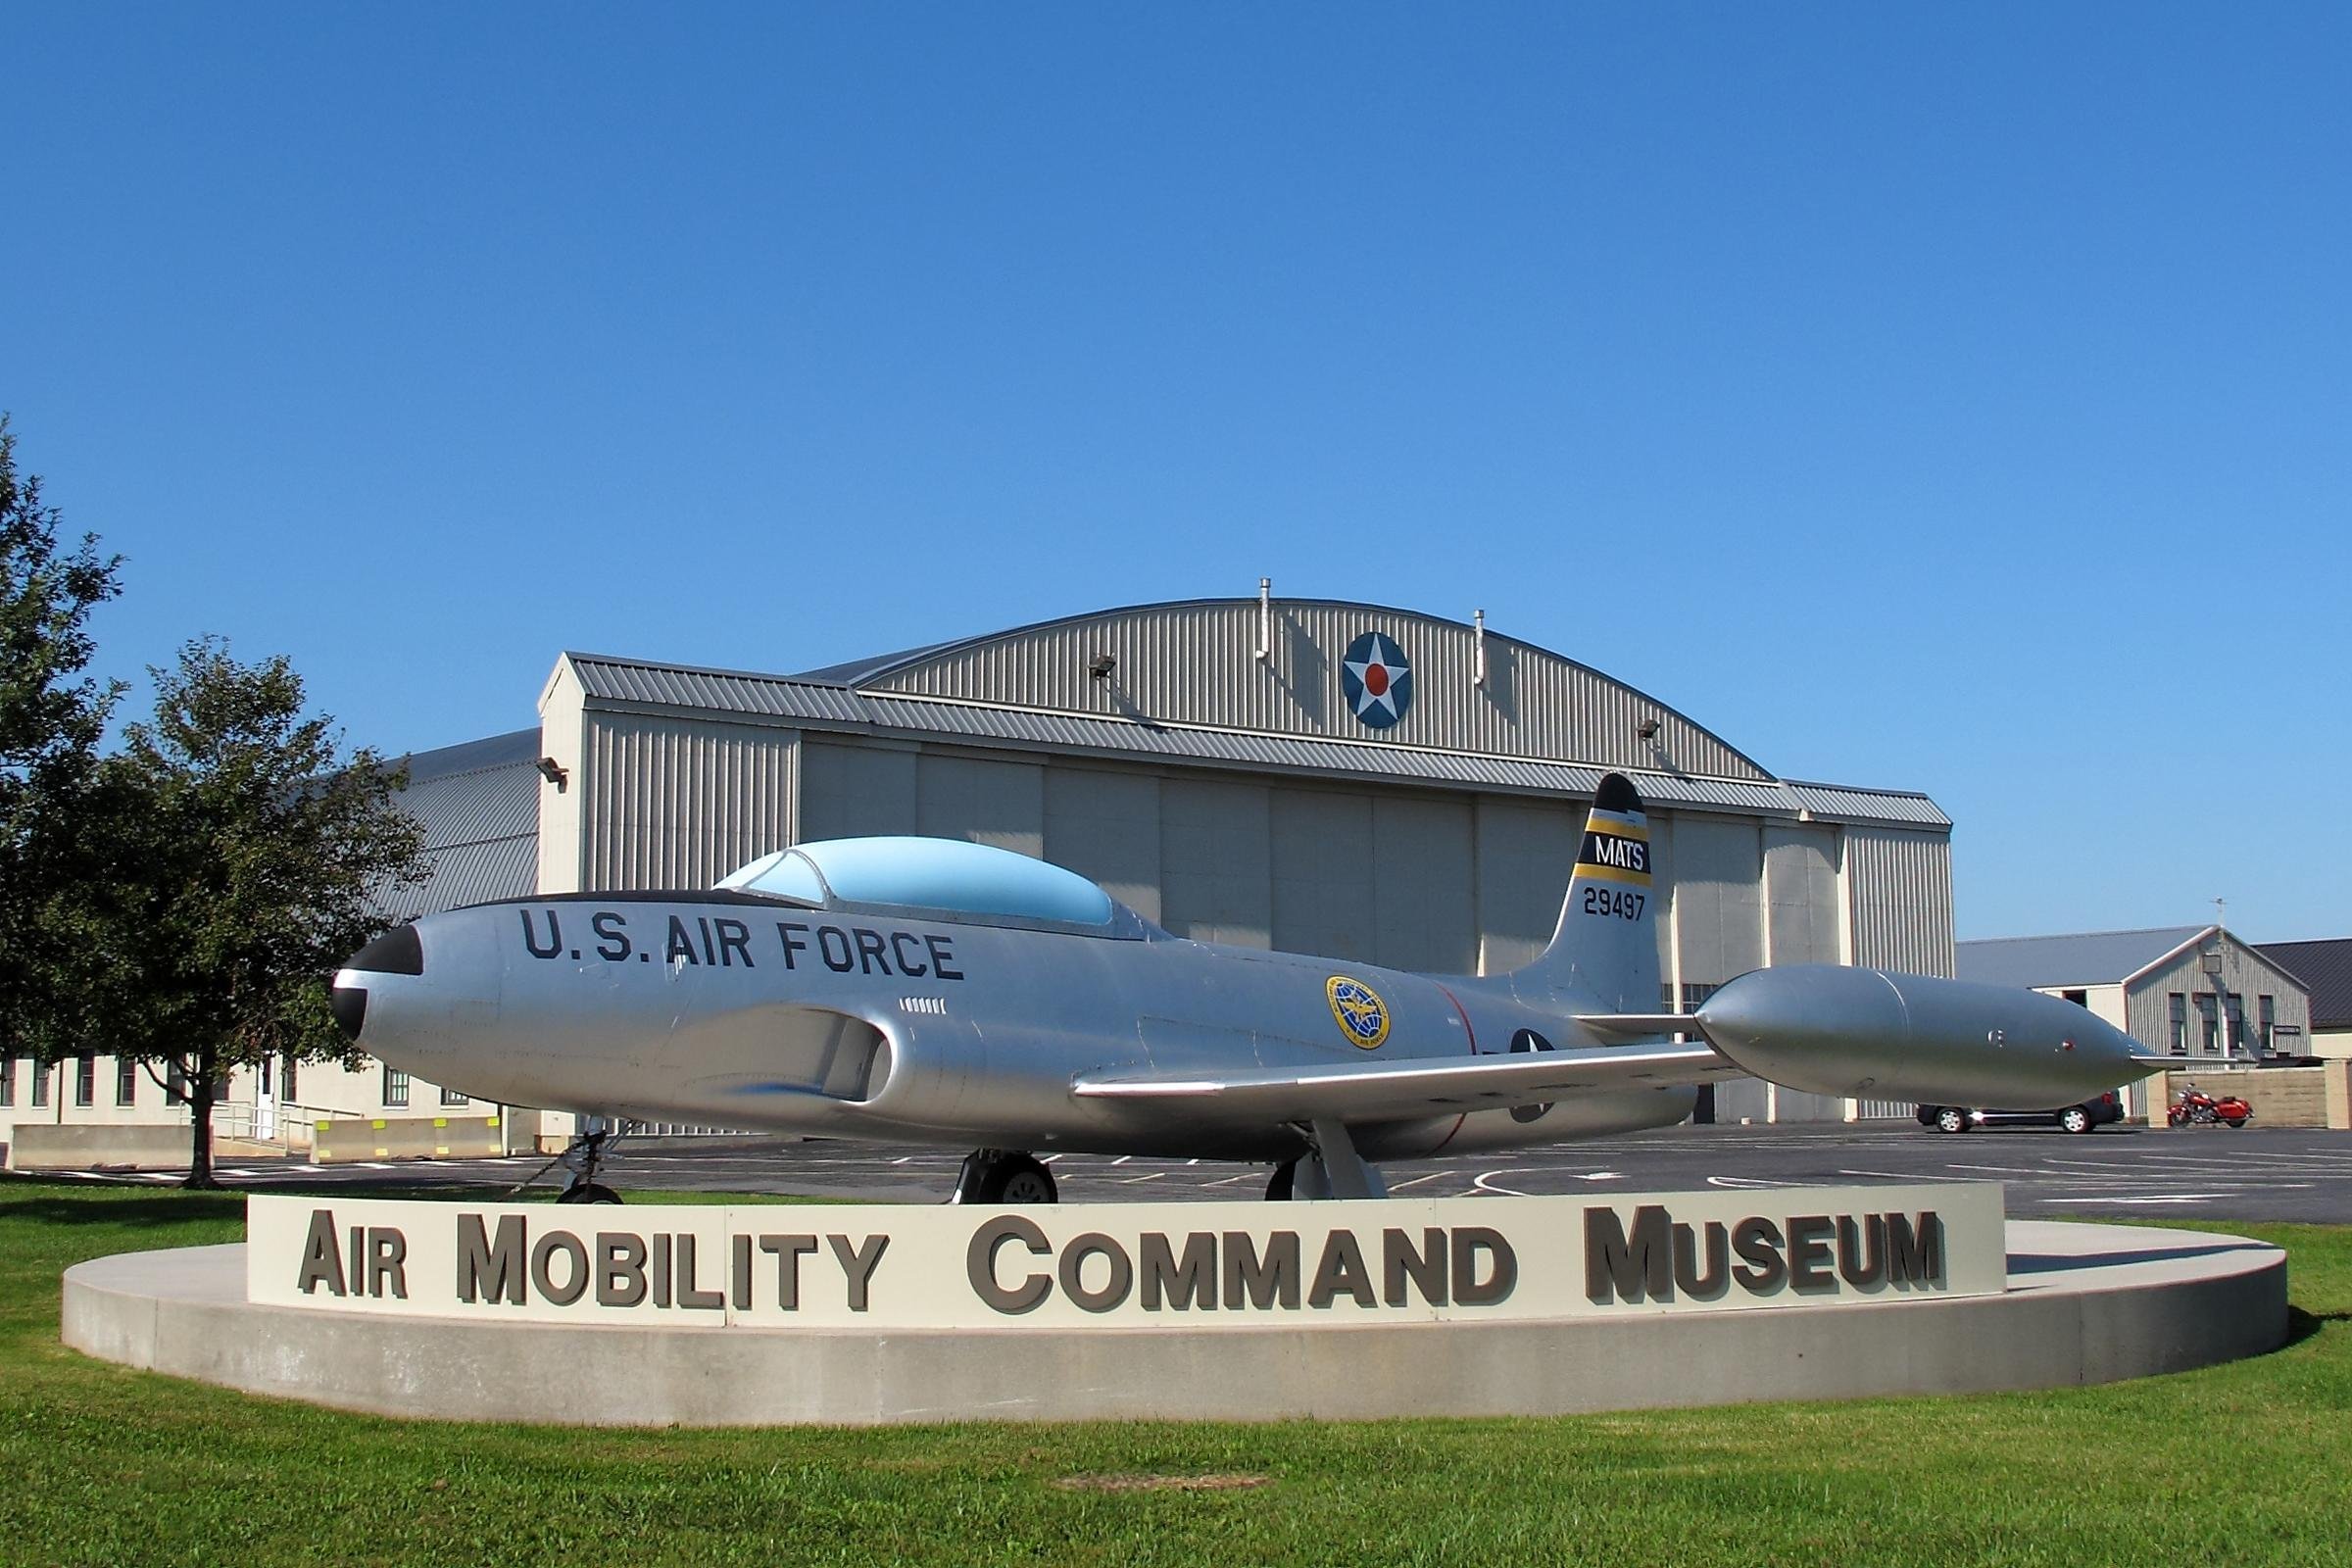 <p>The Air Mobility and Command Museum is one of the most popular and highly rated attractions in Dover. The museum is chock-full of vintage and antique planes, many from the Air Force. Admission is free, and on some tours you can hop in a cockpit for a picture.  </p>